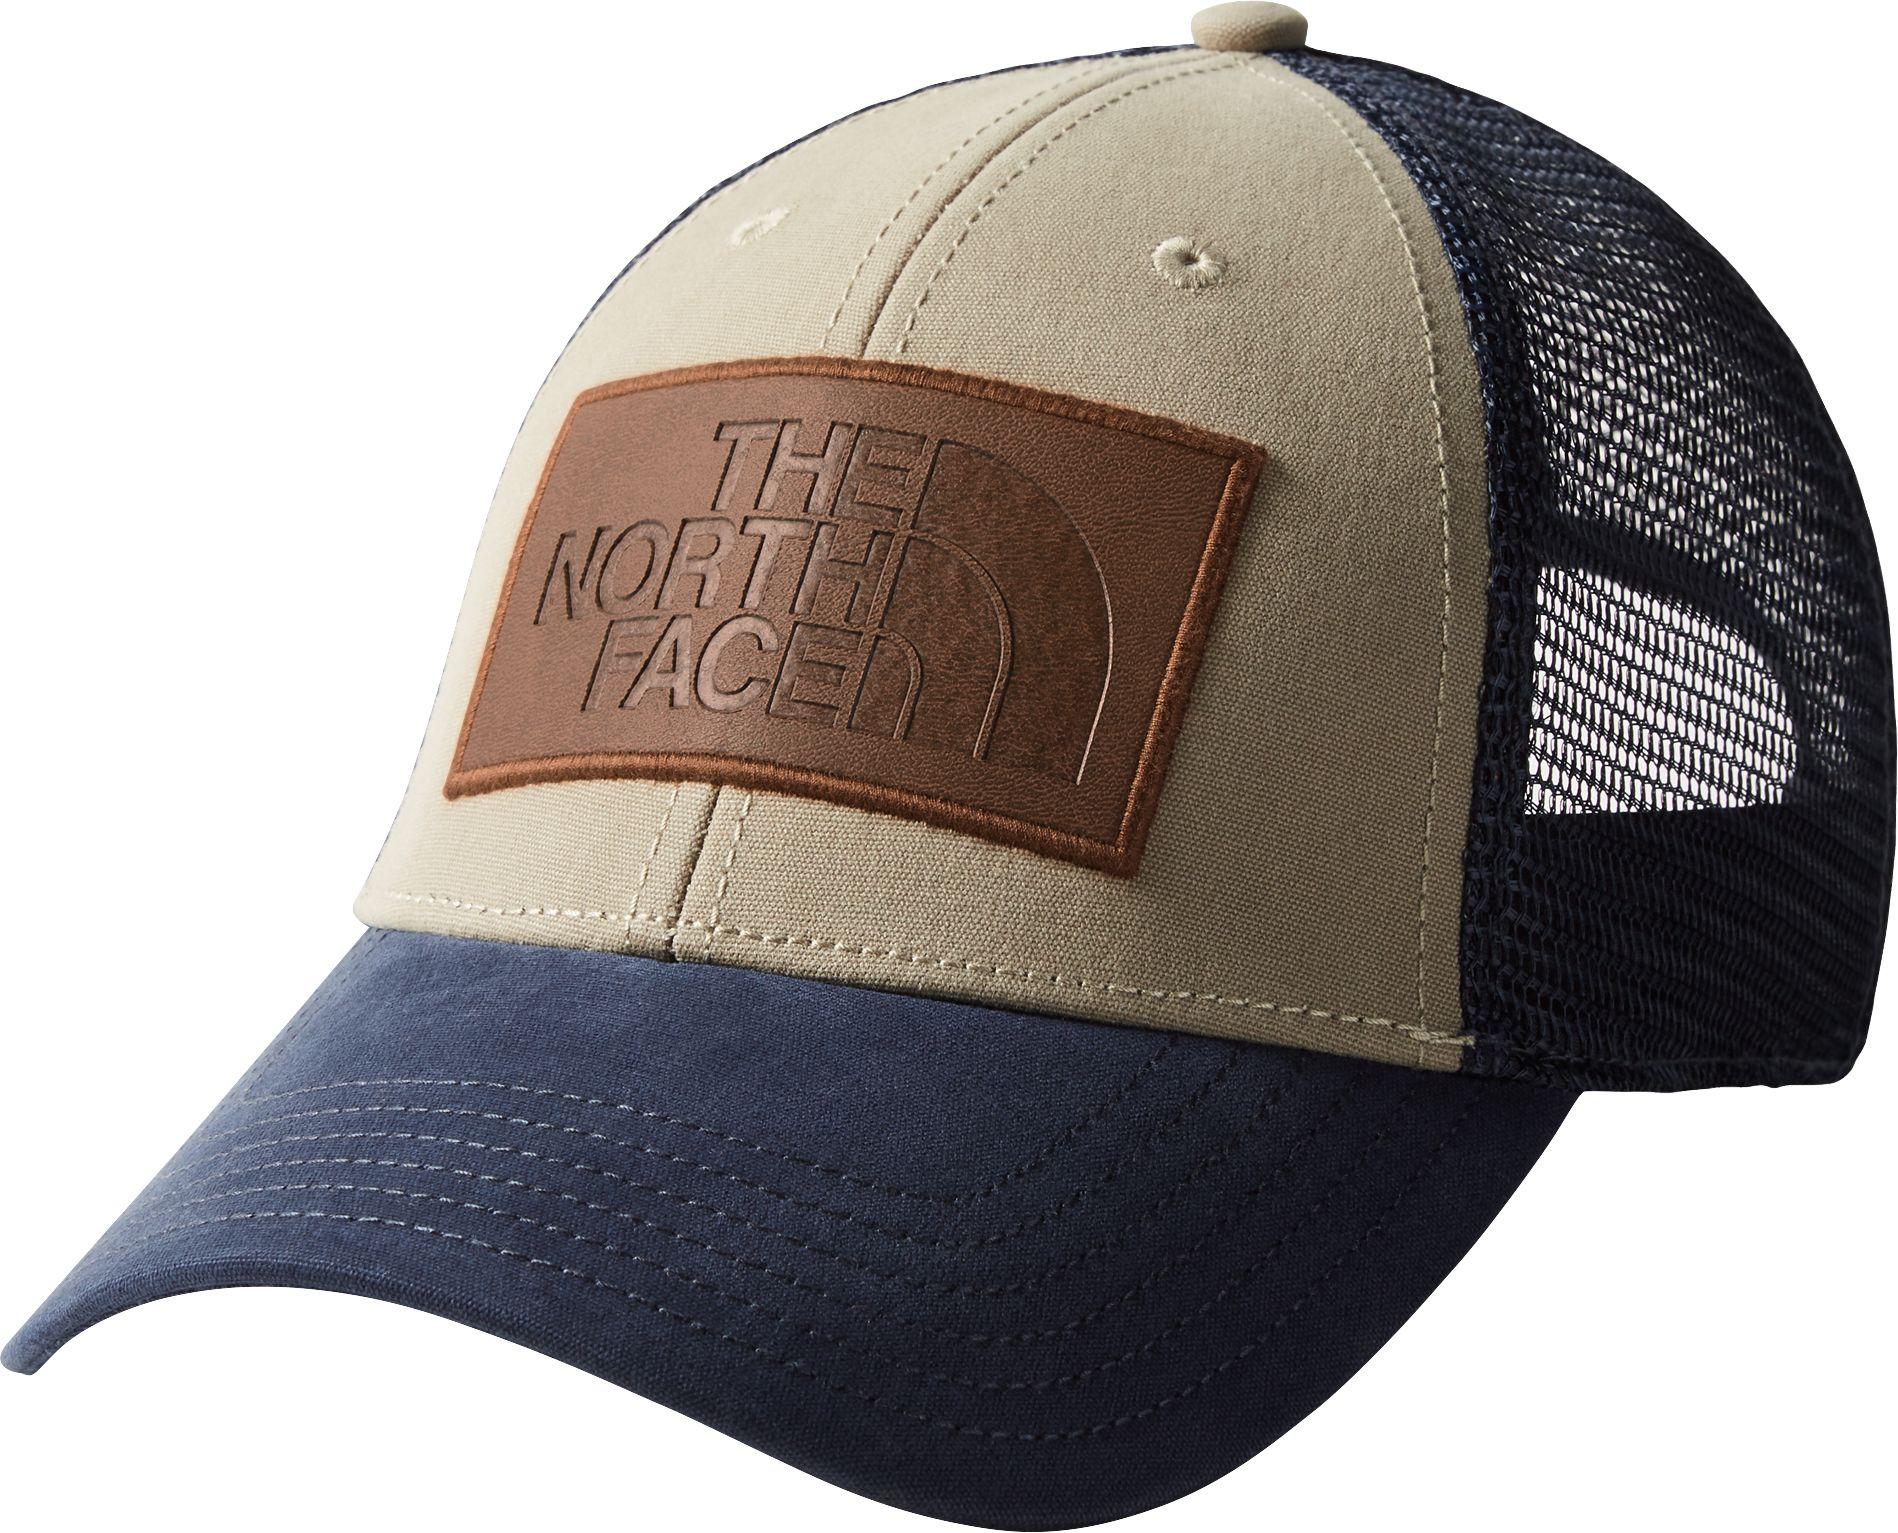 Lyst - The North Face North Face Mudder Deuce Trucker Hat for Men